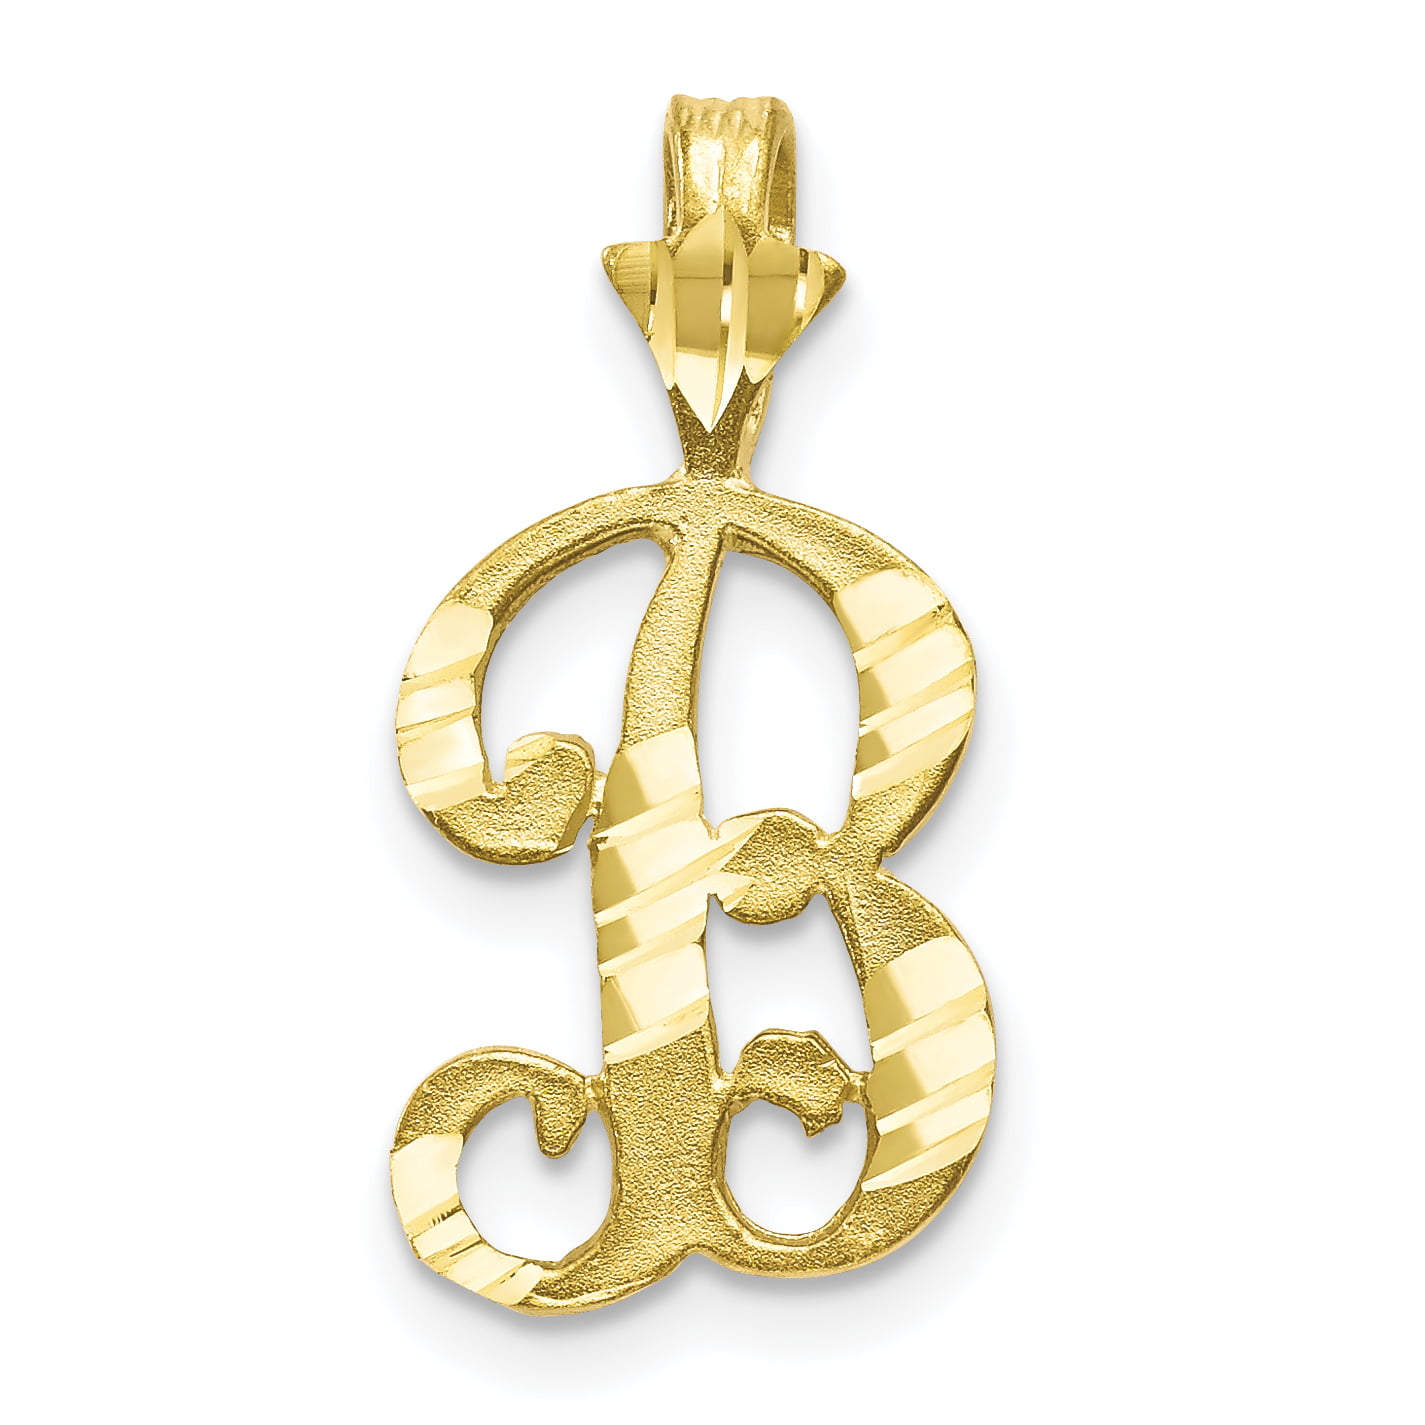 0.79 in x 0.43 in 10K Gold Initial B Charm Pendant 